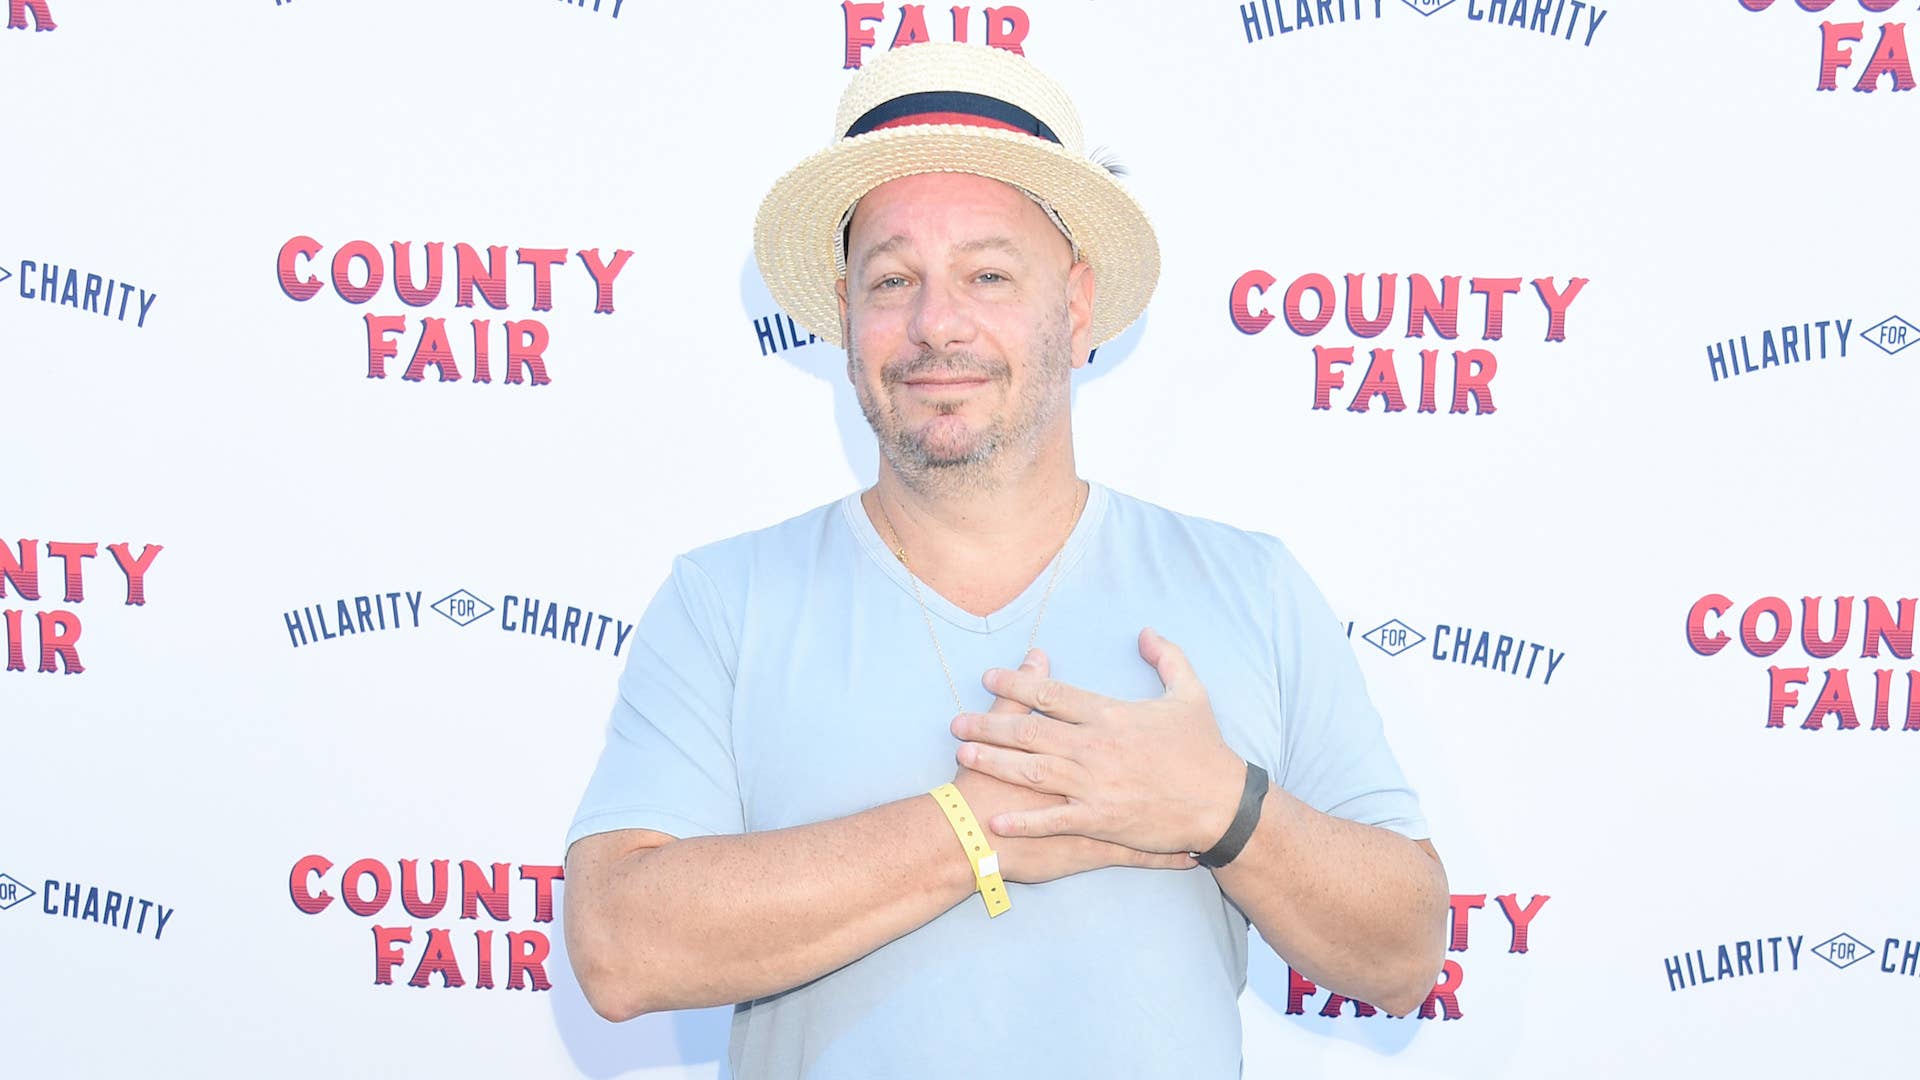 Jeffrey Ross attends Hilarity For Charity's County Fair